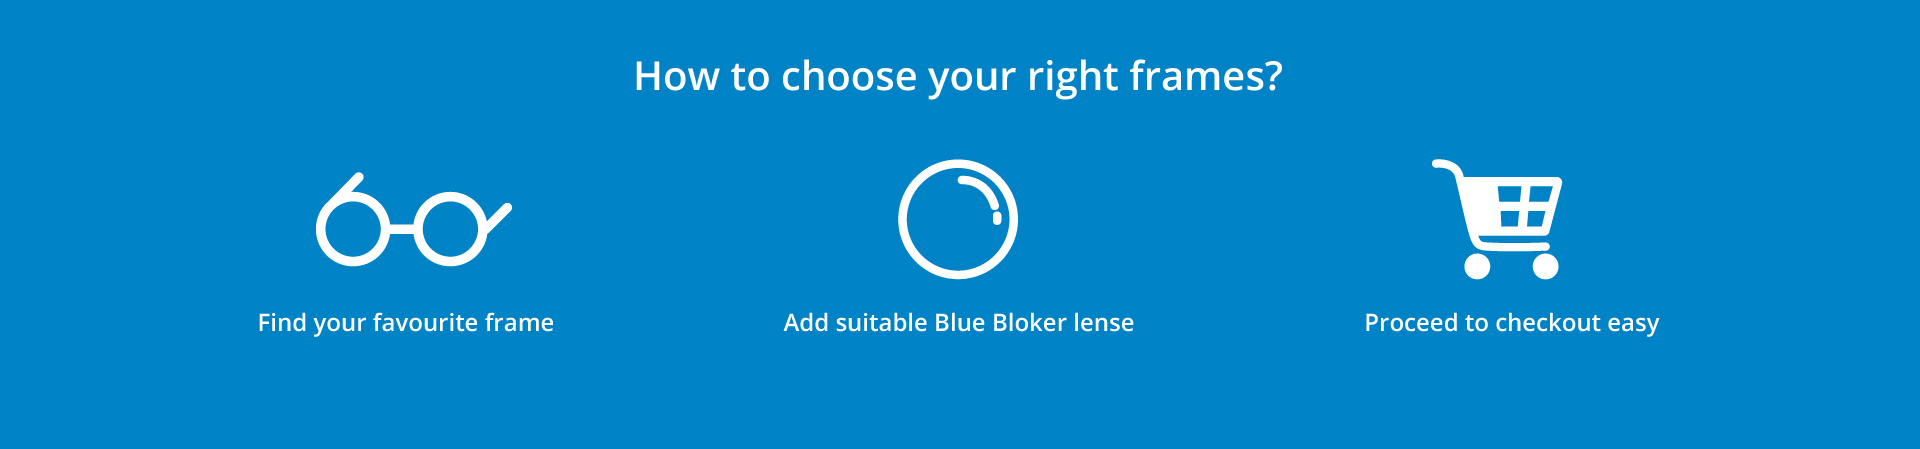 How to choose your right frames